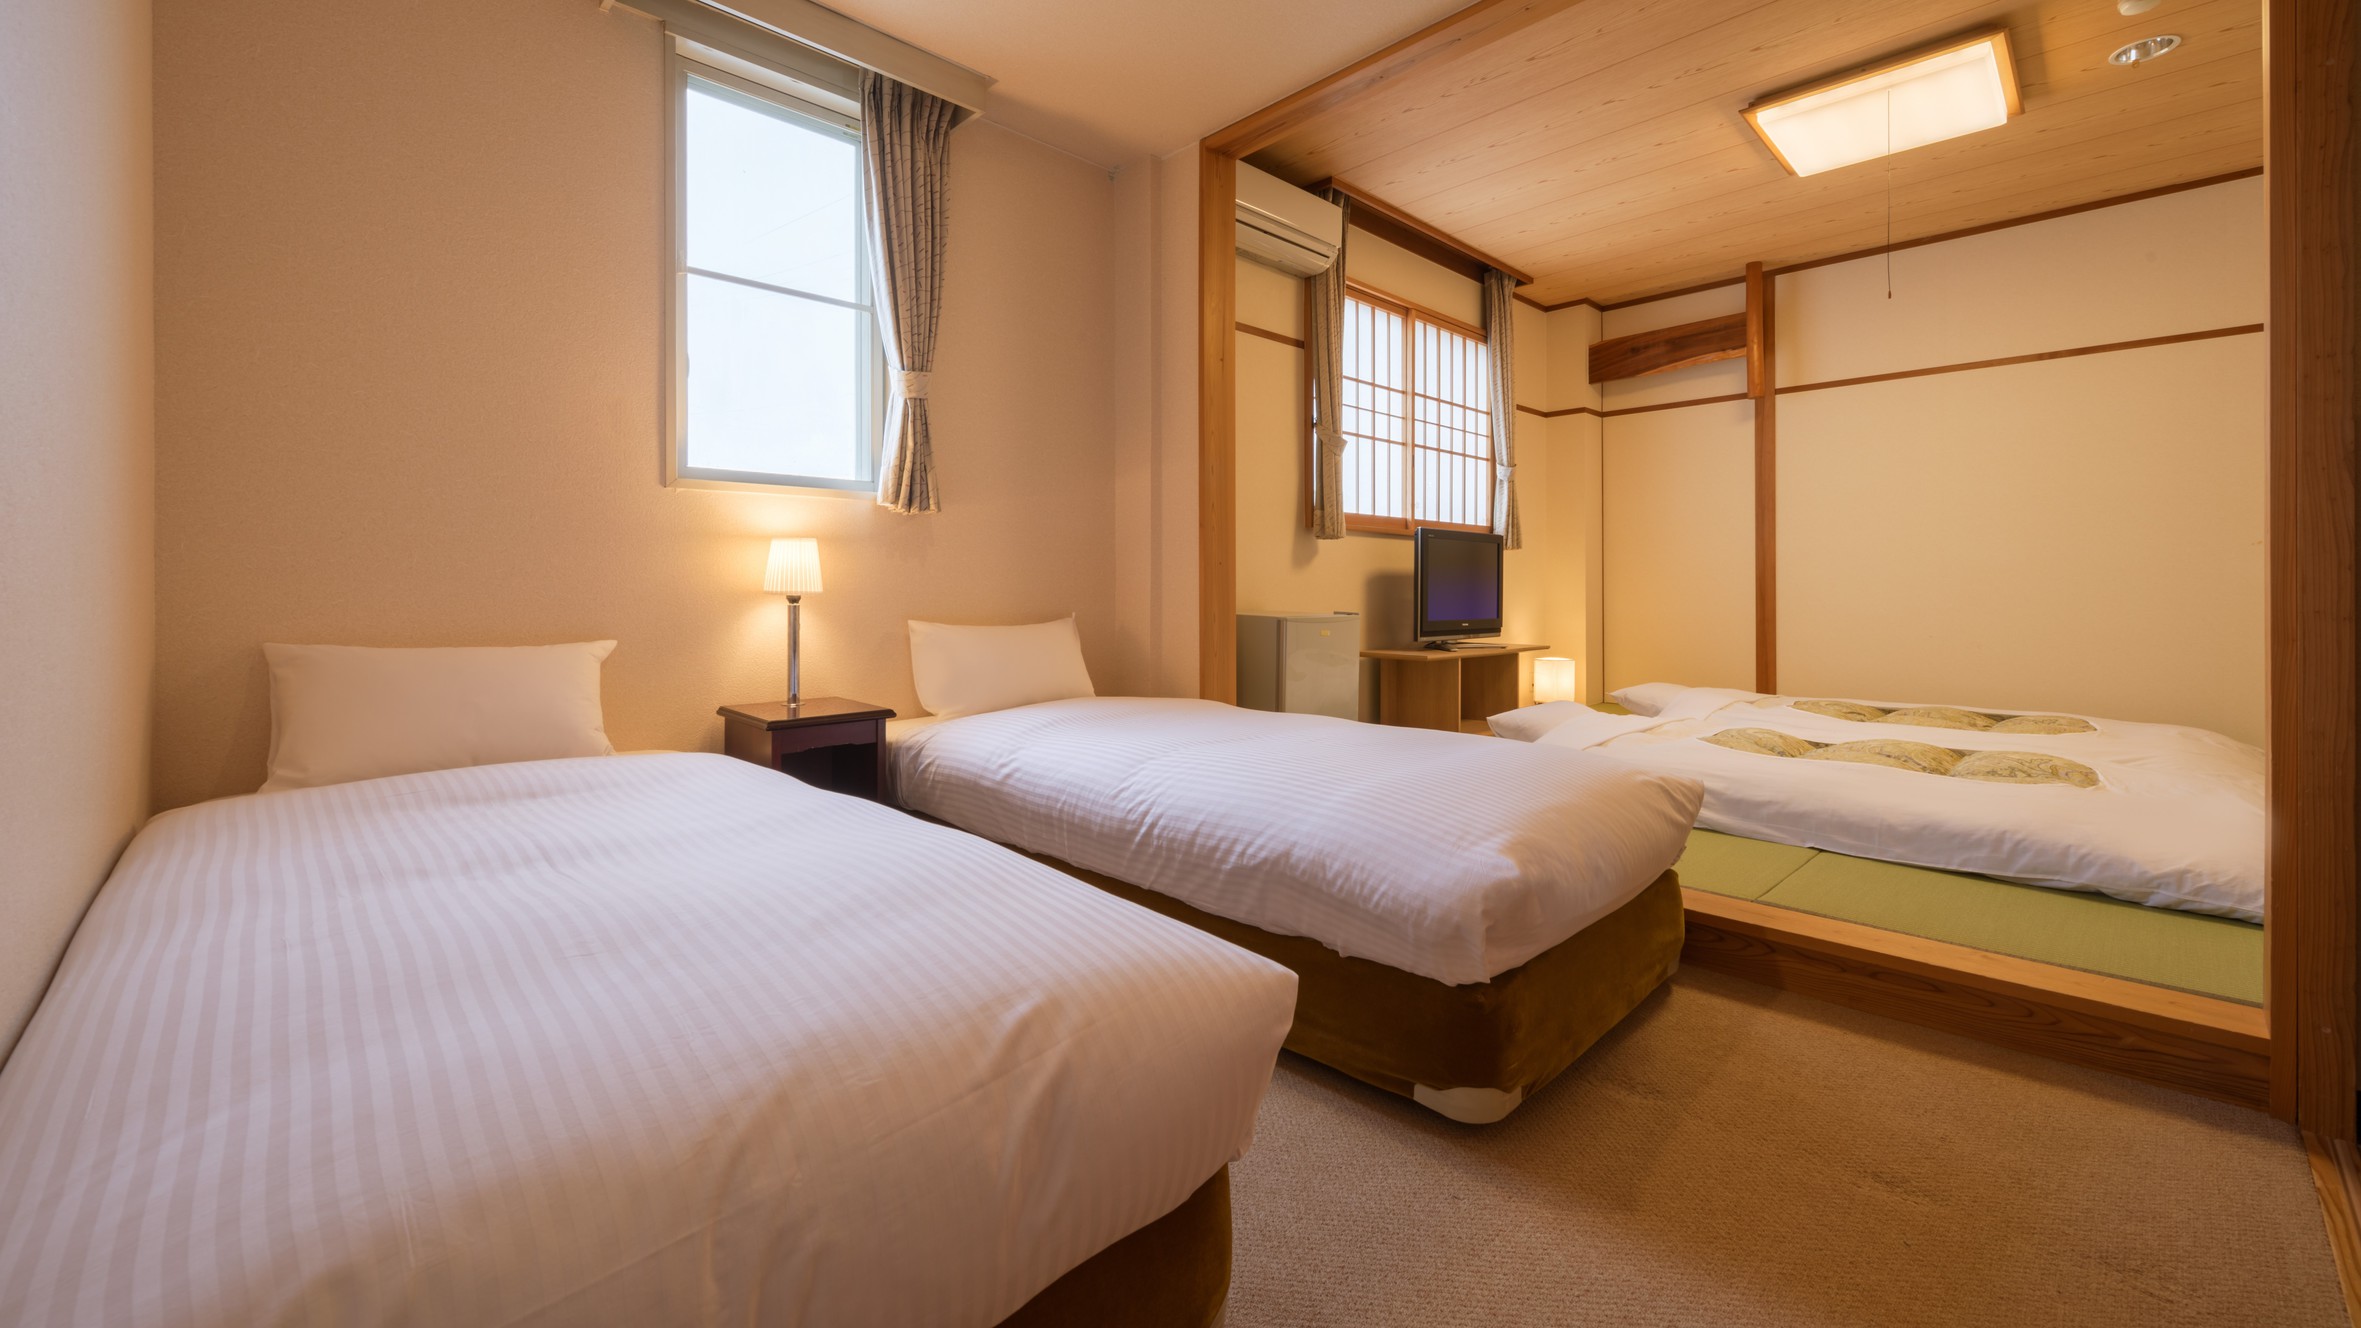 Matsushima Hotel Waraku Matsushima Hotel Waraku is a popular choice amongst travelers in Matsushima, whether exploring or just passing through. Offering a variety of facilities and services, the property provides all you nee